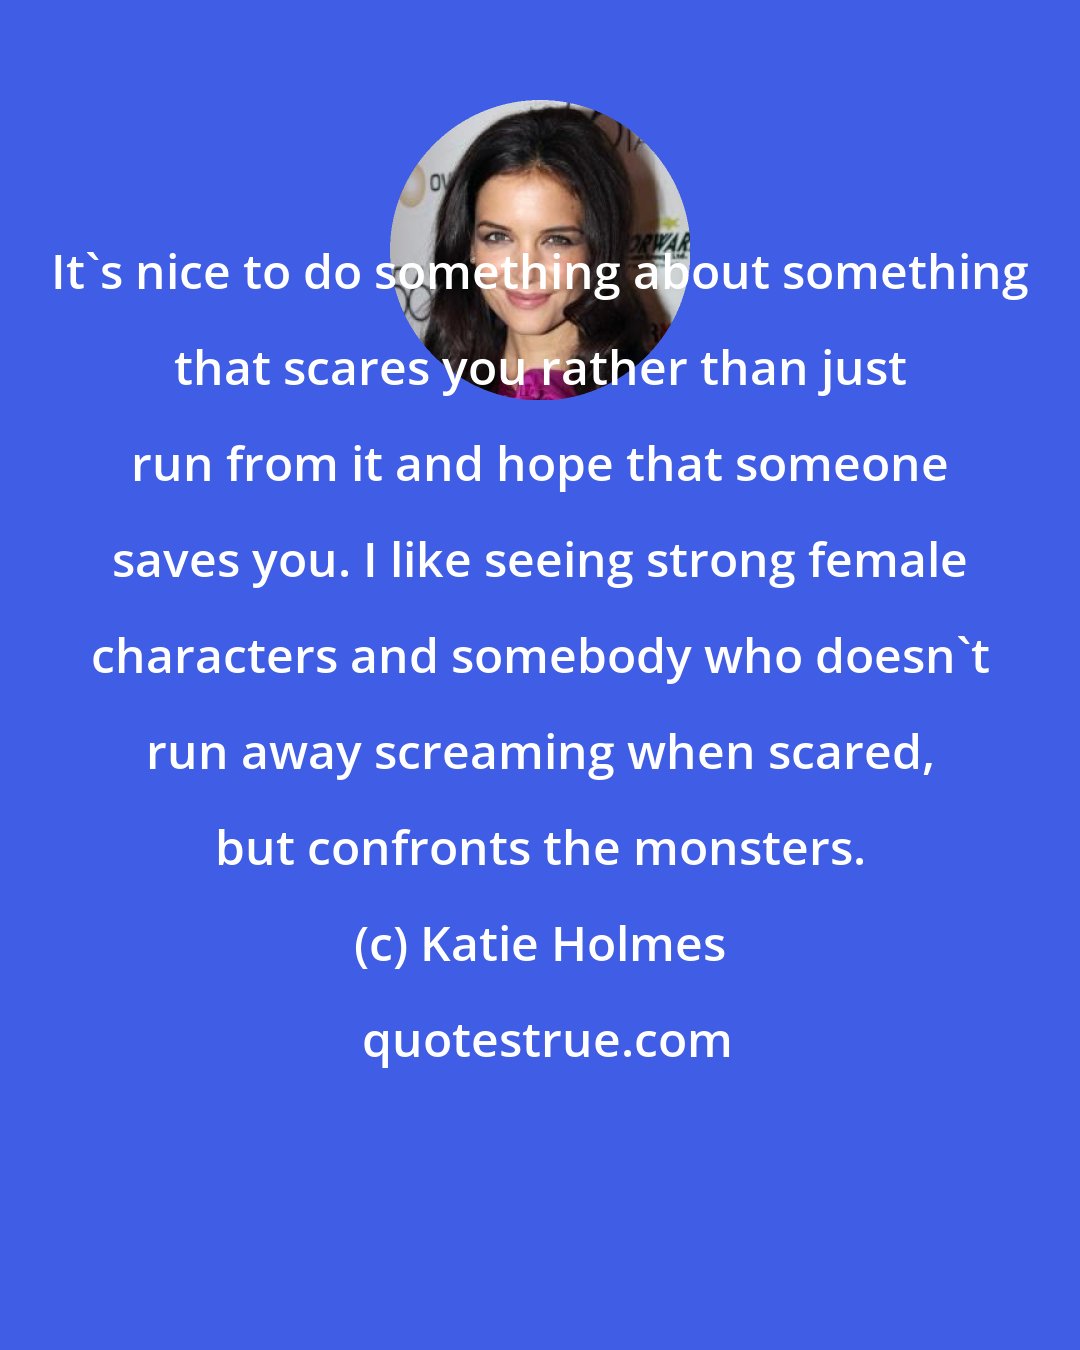 Katie Holmes: It's nice to do something about something that scares you rather than just run from it and hope that someone saves you. I like seeing strong female characters and somebody who doesn't run away screaming when scared, but confronts the monsters.